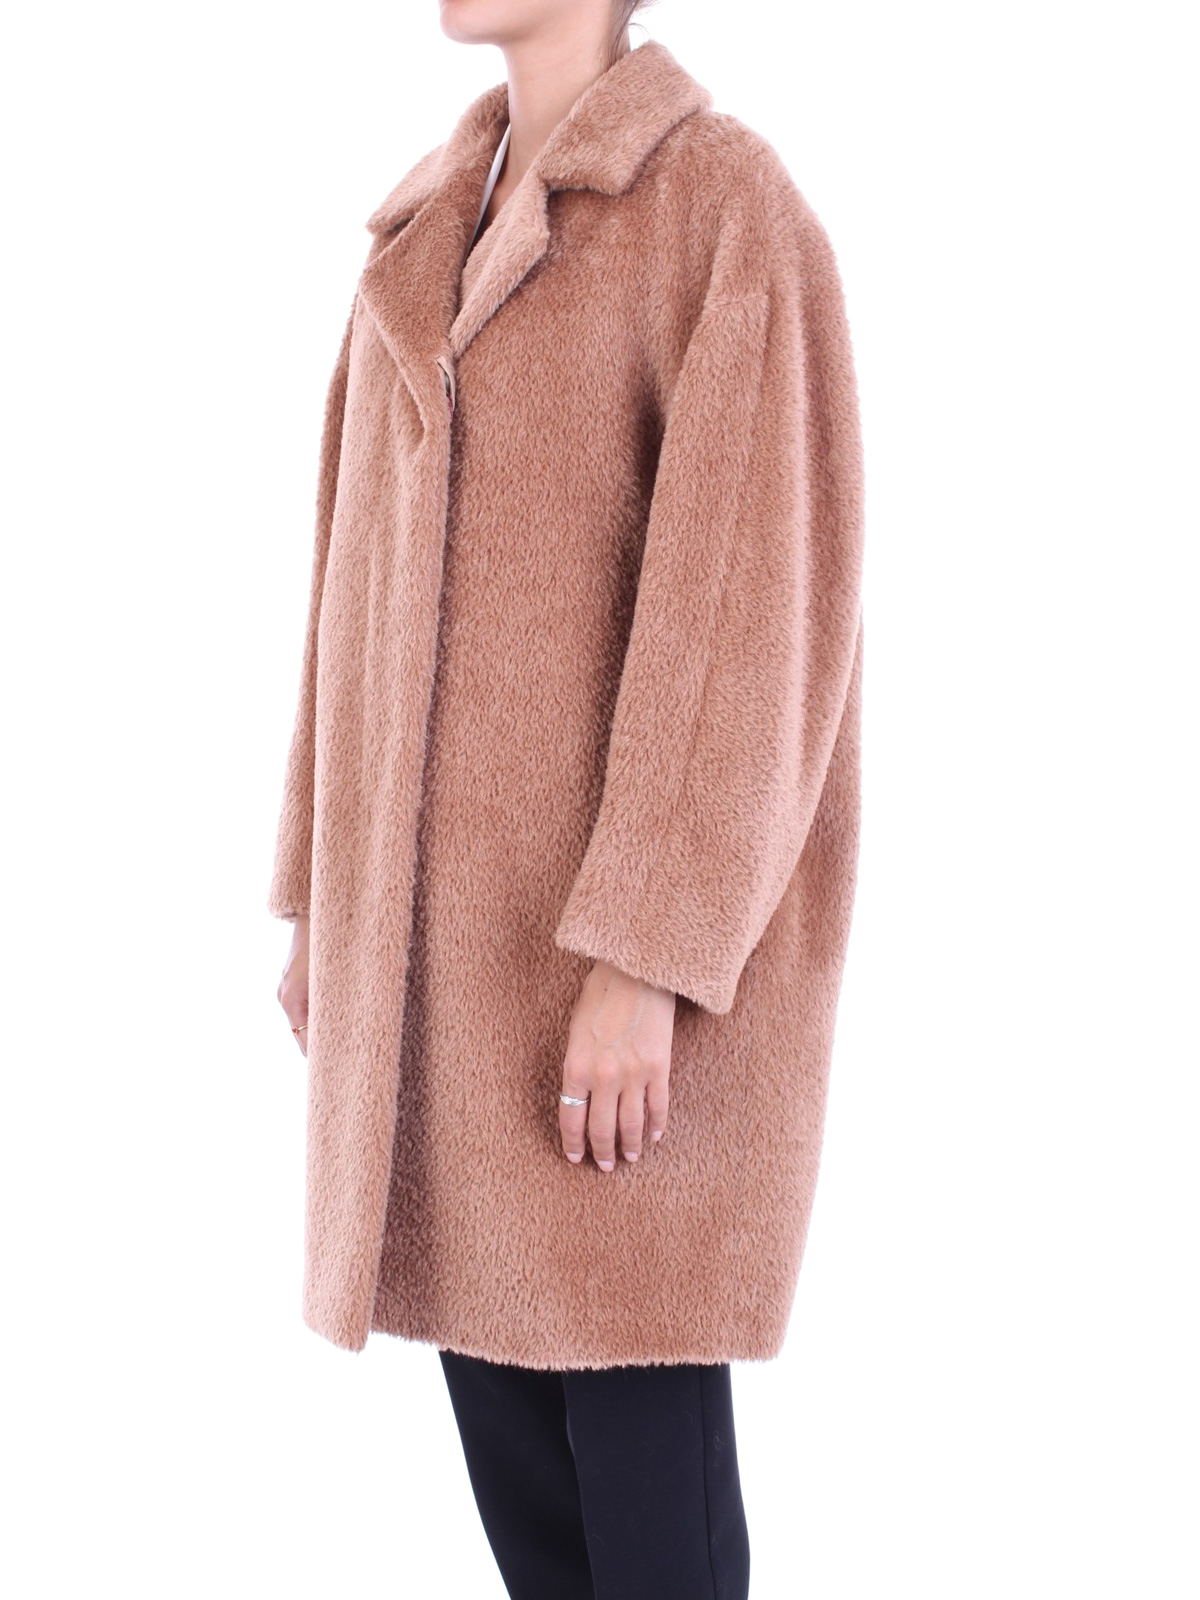 Teddy Max Mara Coat Clearance, 53% OFF | www.angloamericancentre.it